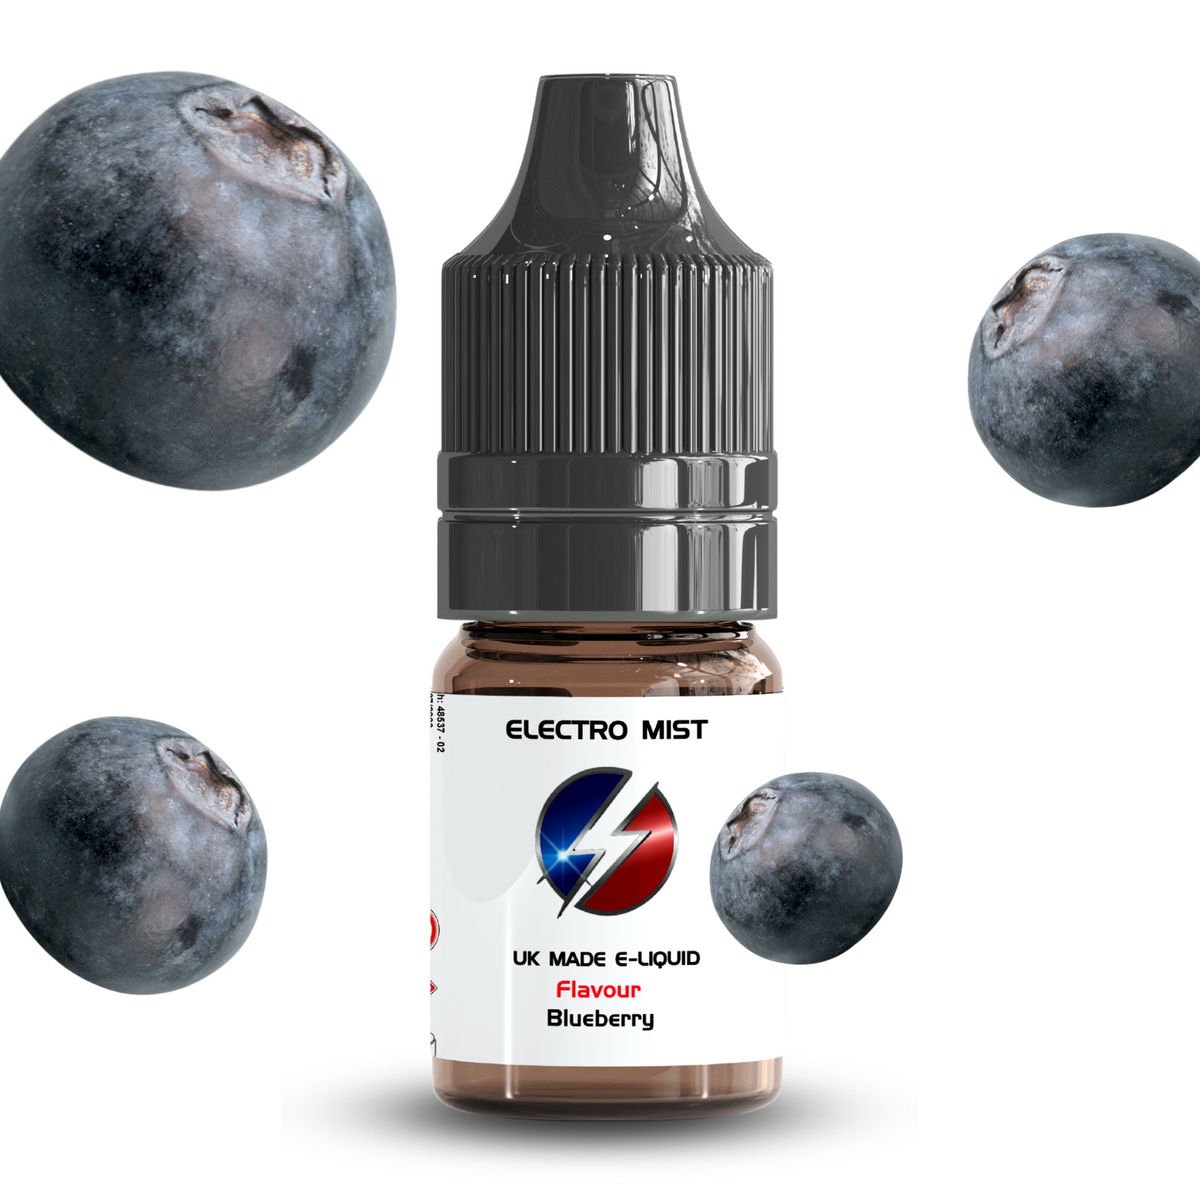 Electromist, the e-liquid brand you can trust. Get your taste buds ready for a flavour sensation, Blueberry. Nicotine Content: 3mg/6mg/12mg. Products may contain nicotine. For over 18s Only ejuice, vape pen, eliquid, e cigarette, 10ml, vaping, cloud, PG, VG, 60/40, vape liquid, Flavour